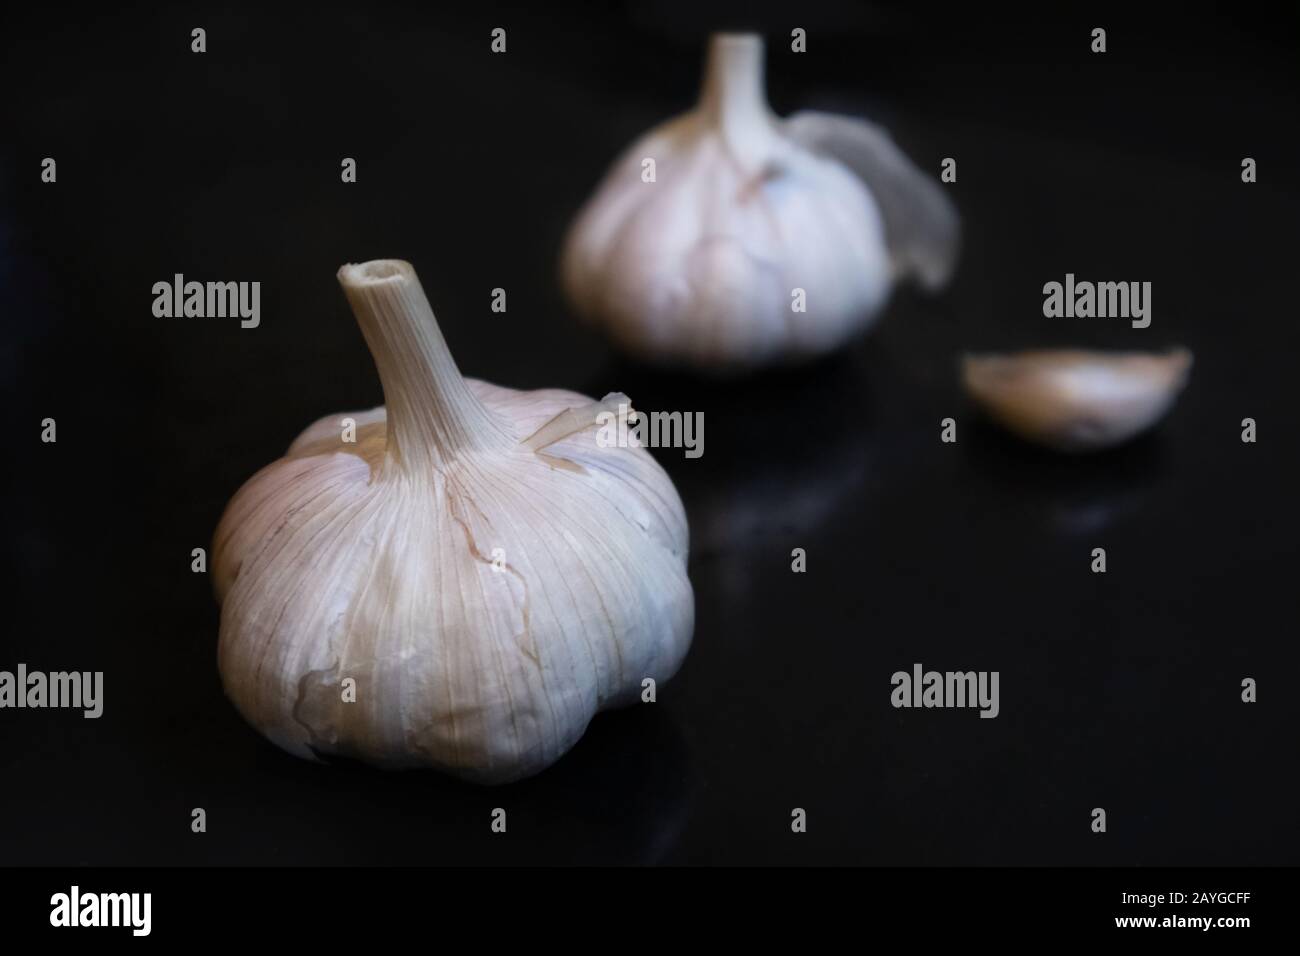 Garlic close-up product show on black background. Spice garlic clove vitamin food winter health eating Stock Photo